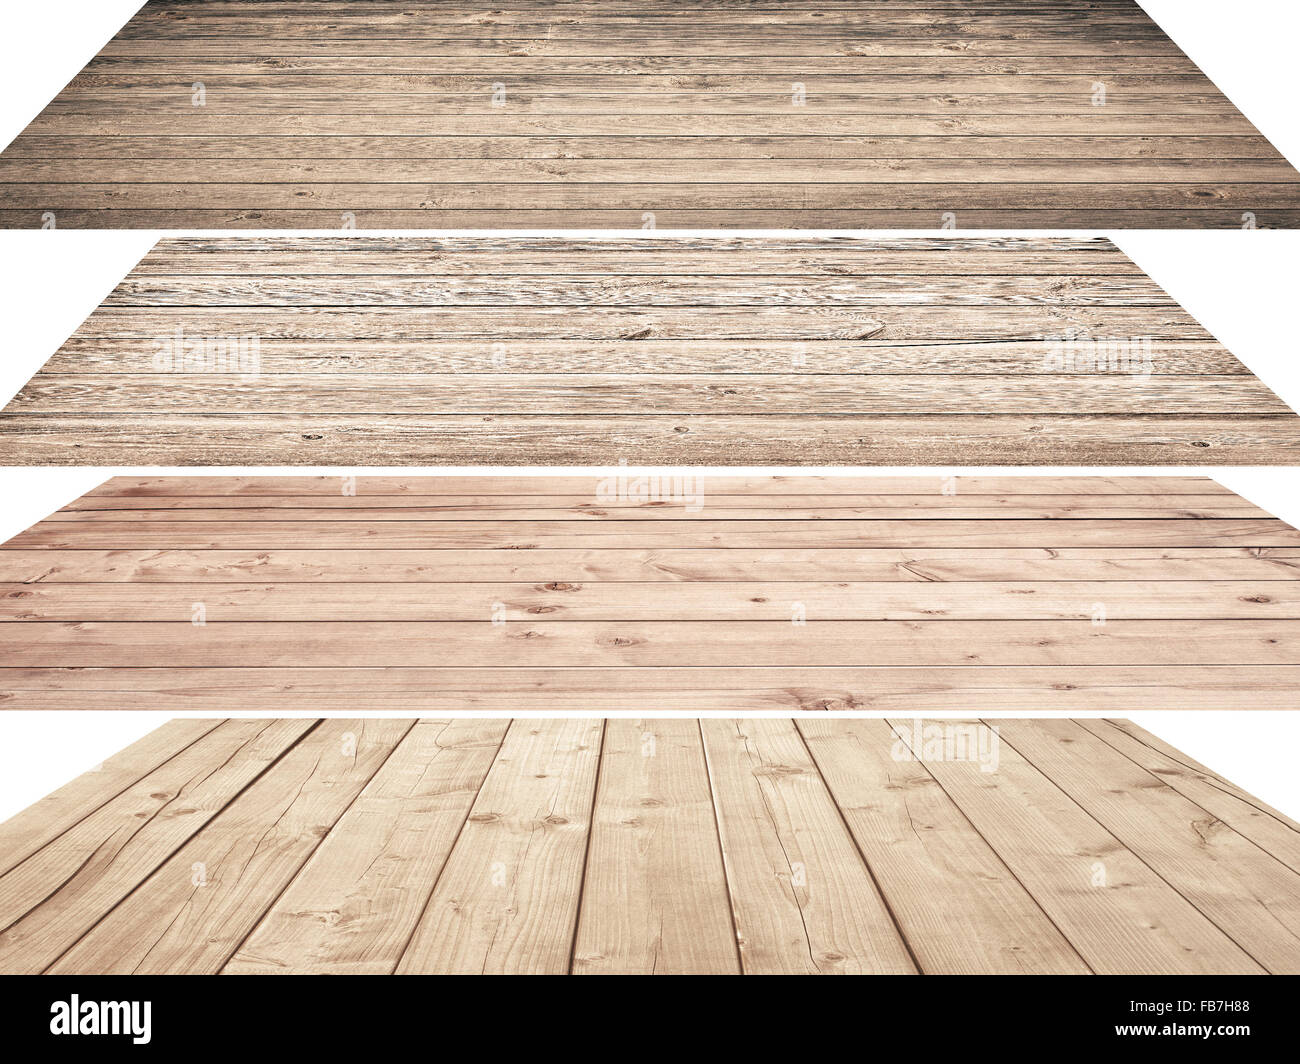 Wooden shelves or table surface isolated on white background Stock Photo